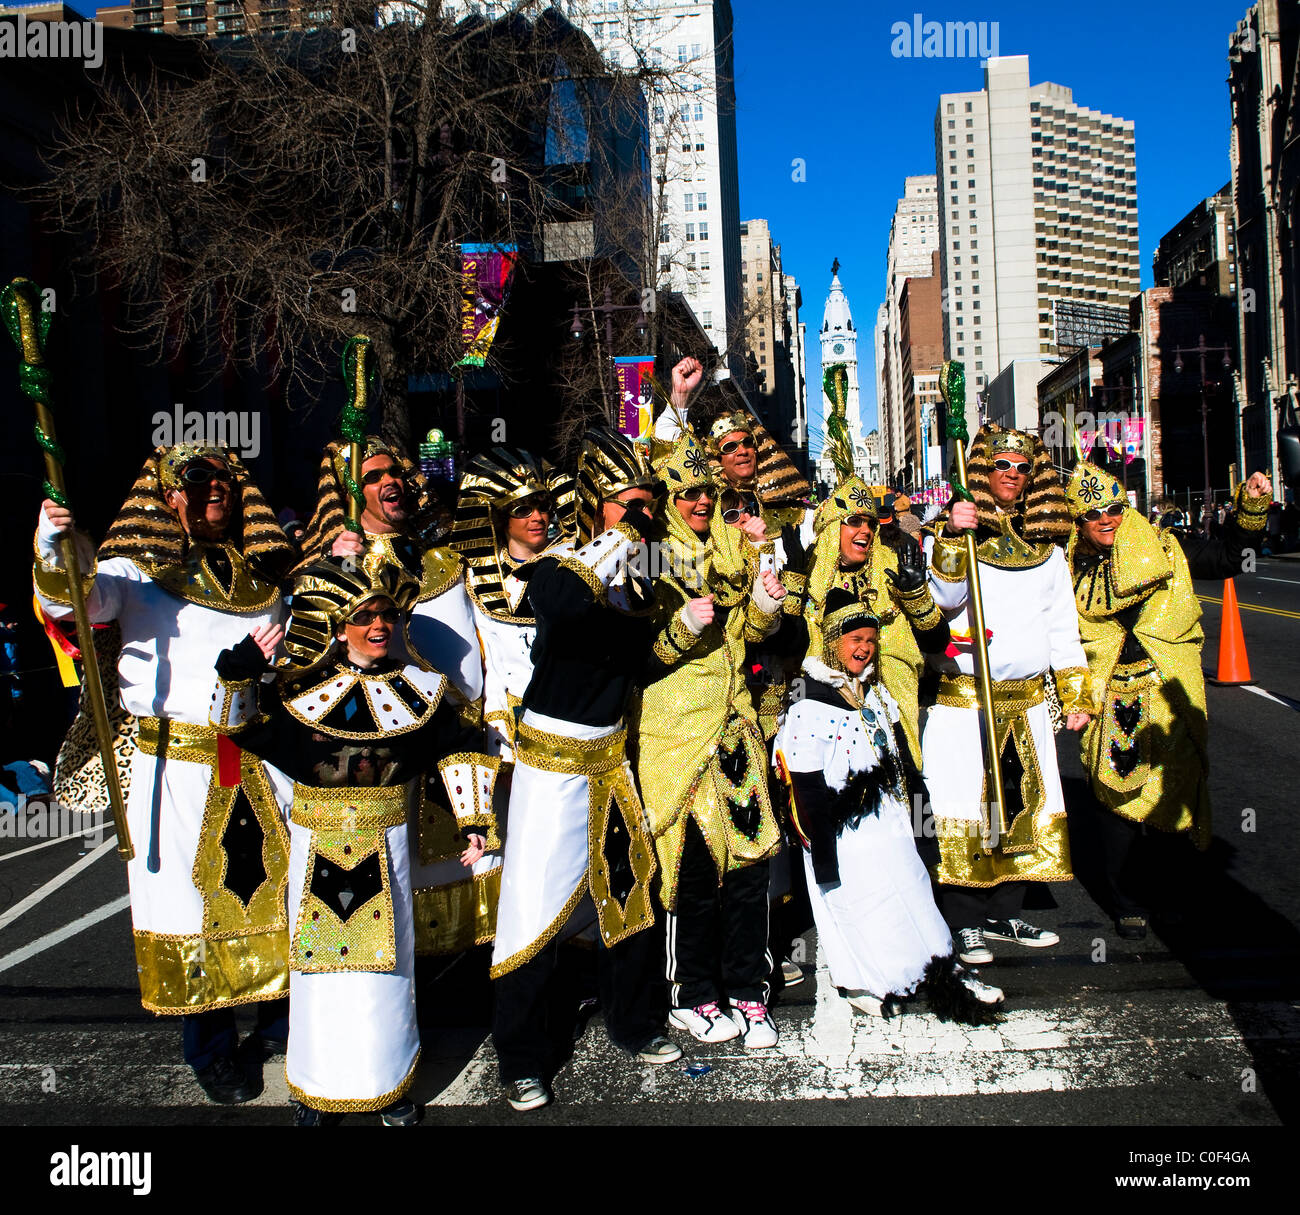 The colorful Mummers parade in Philadelphia, USA. Stock Photo